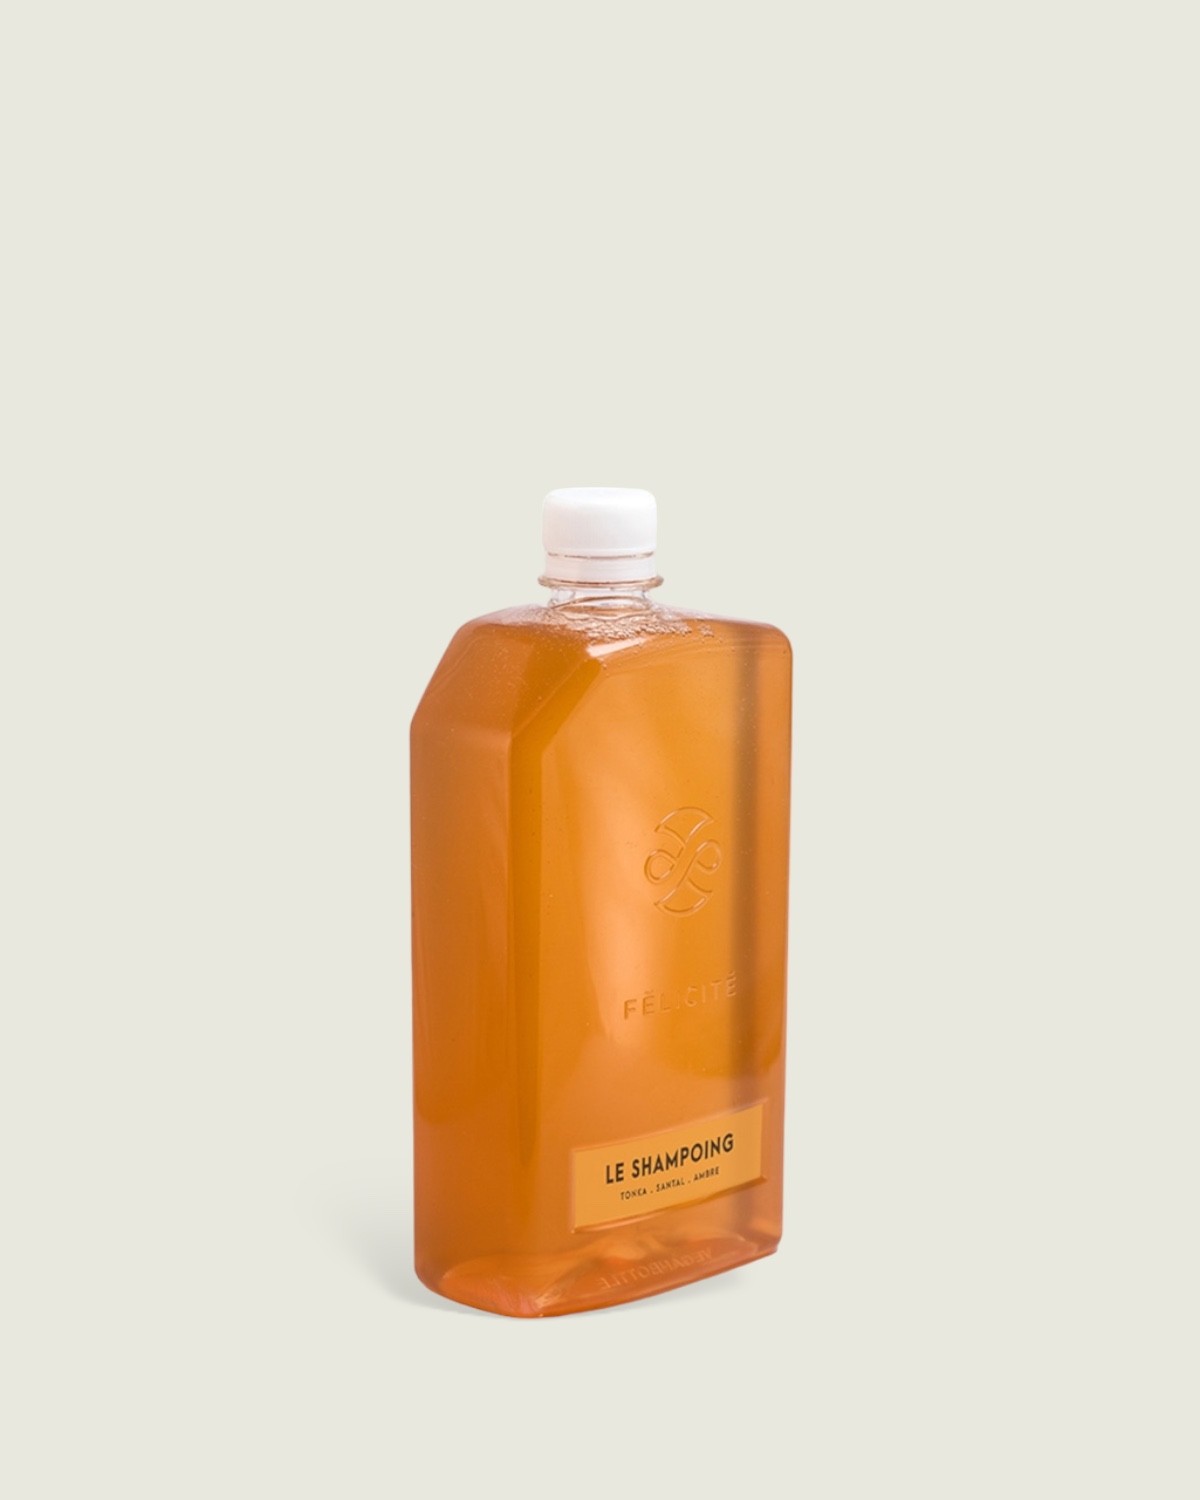 RECHARGE SHAMPOING - Tonka, Santal & Ambre FELICITE - eco responsable made  in france